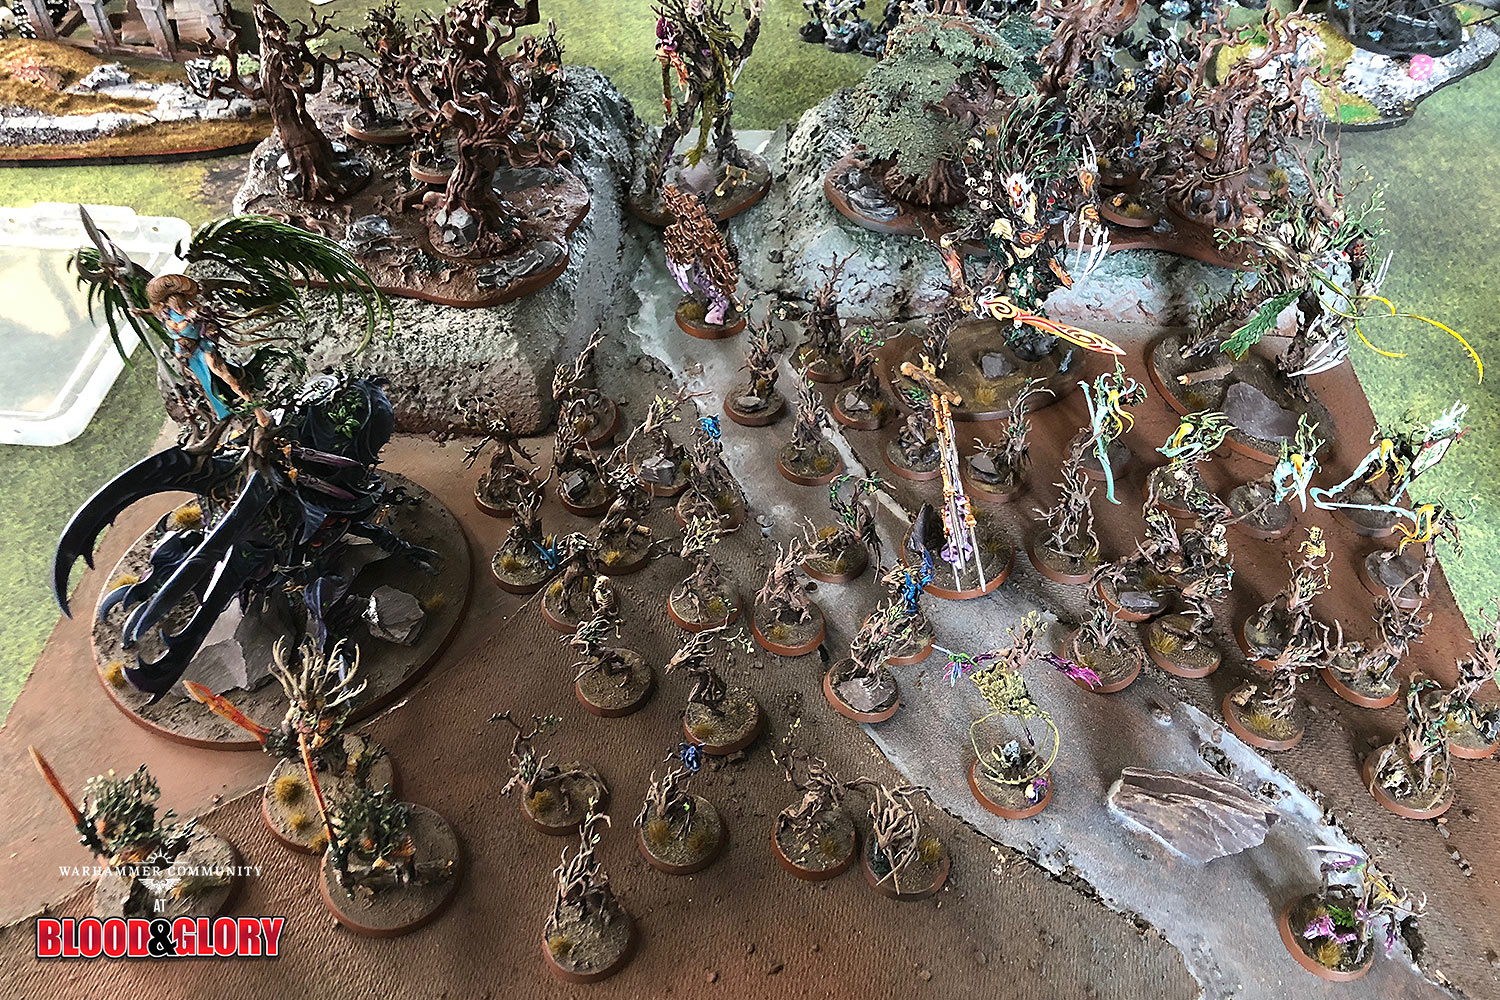 Starting a Tyranids Army in Warhammer 40,000 – Everything You Need